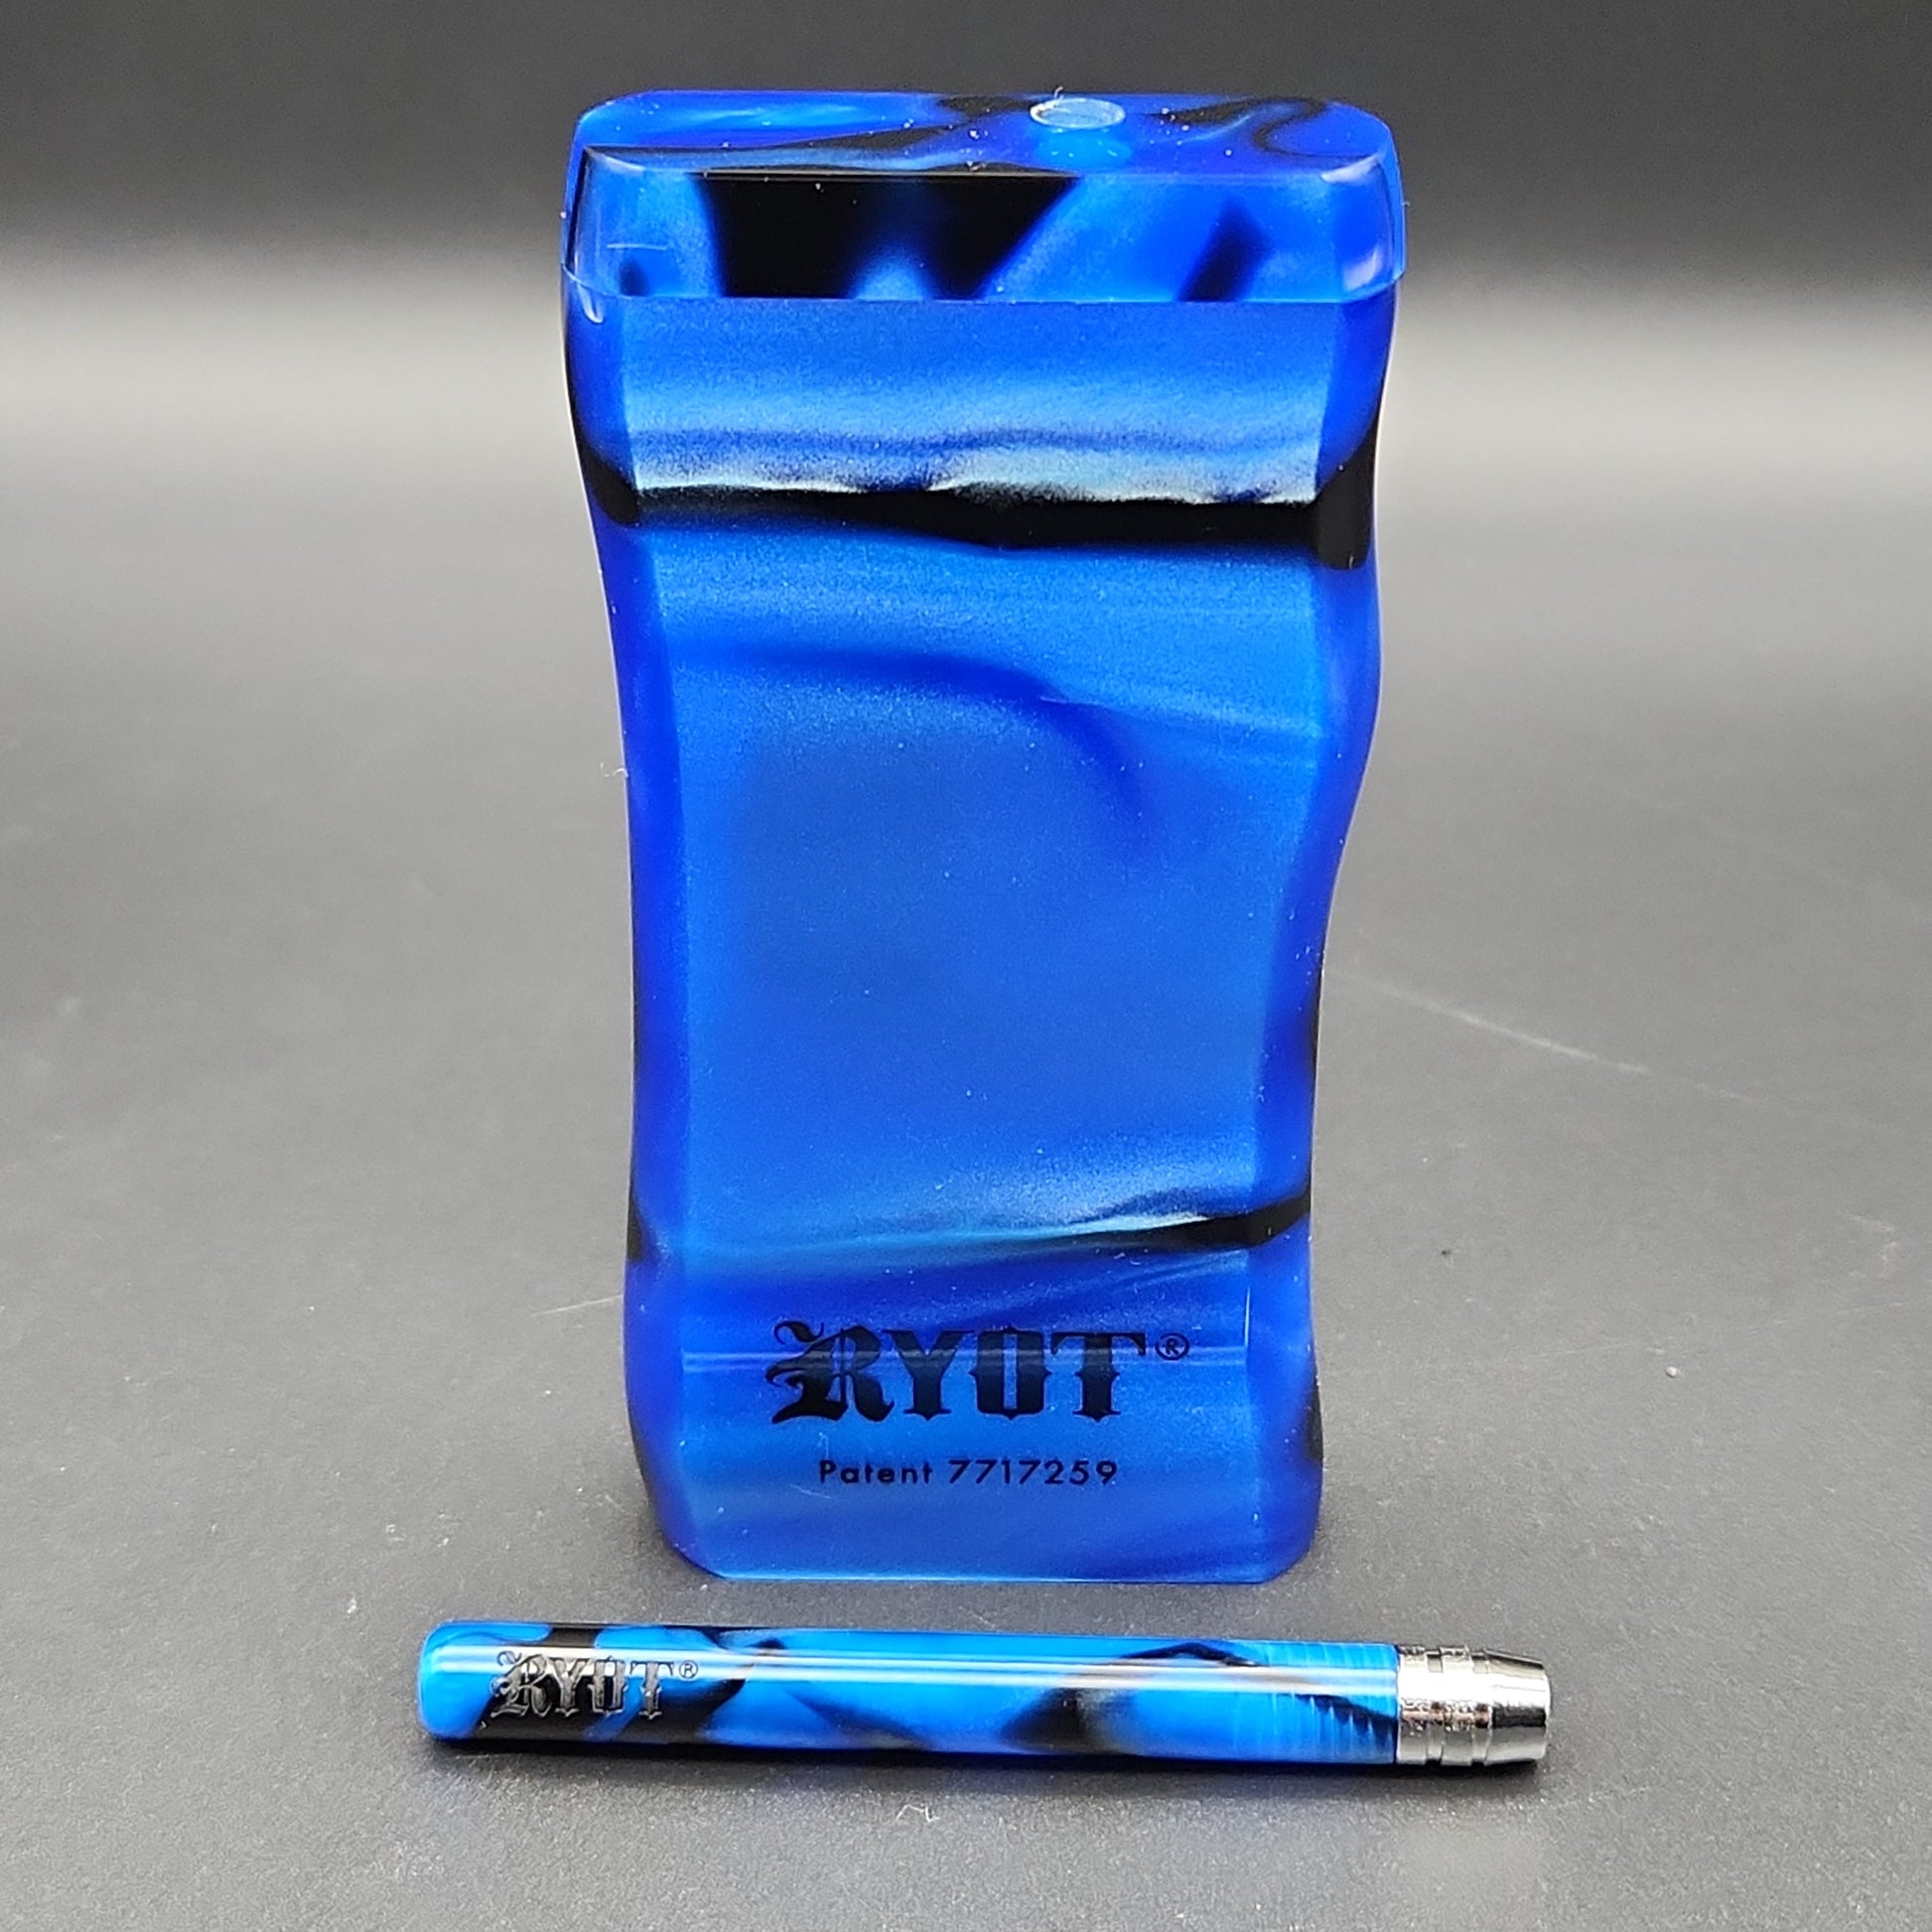 RYOT Acrylic Magnetic Taster Box - 3" / Large - blue and black